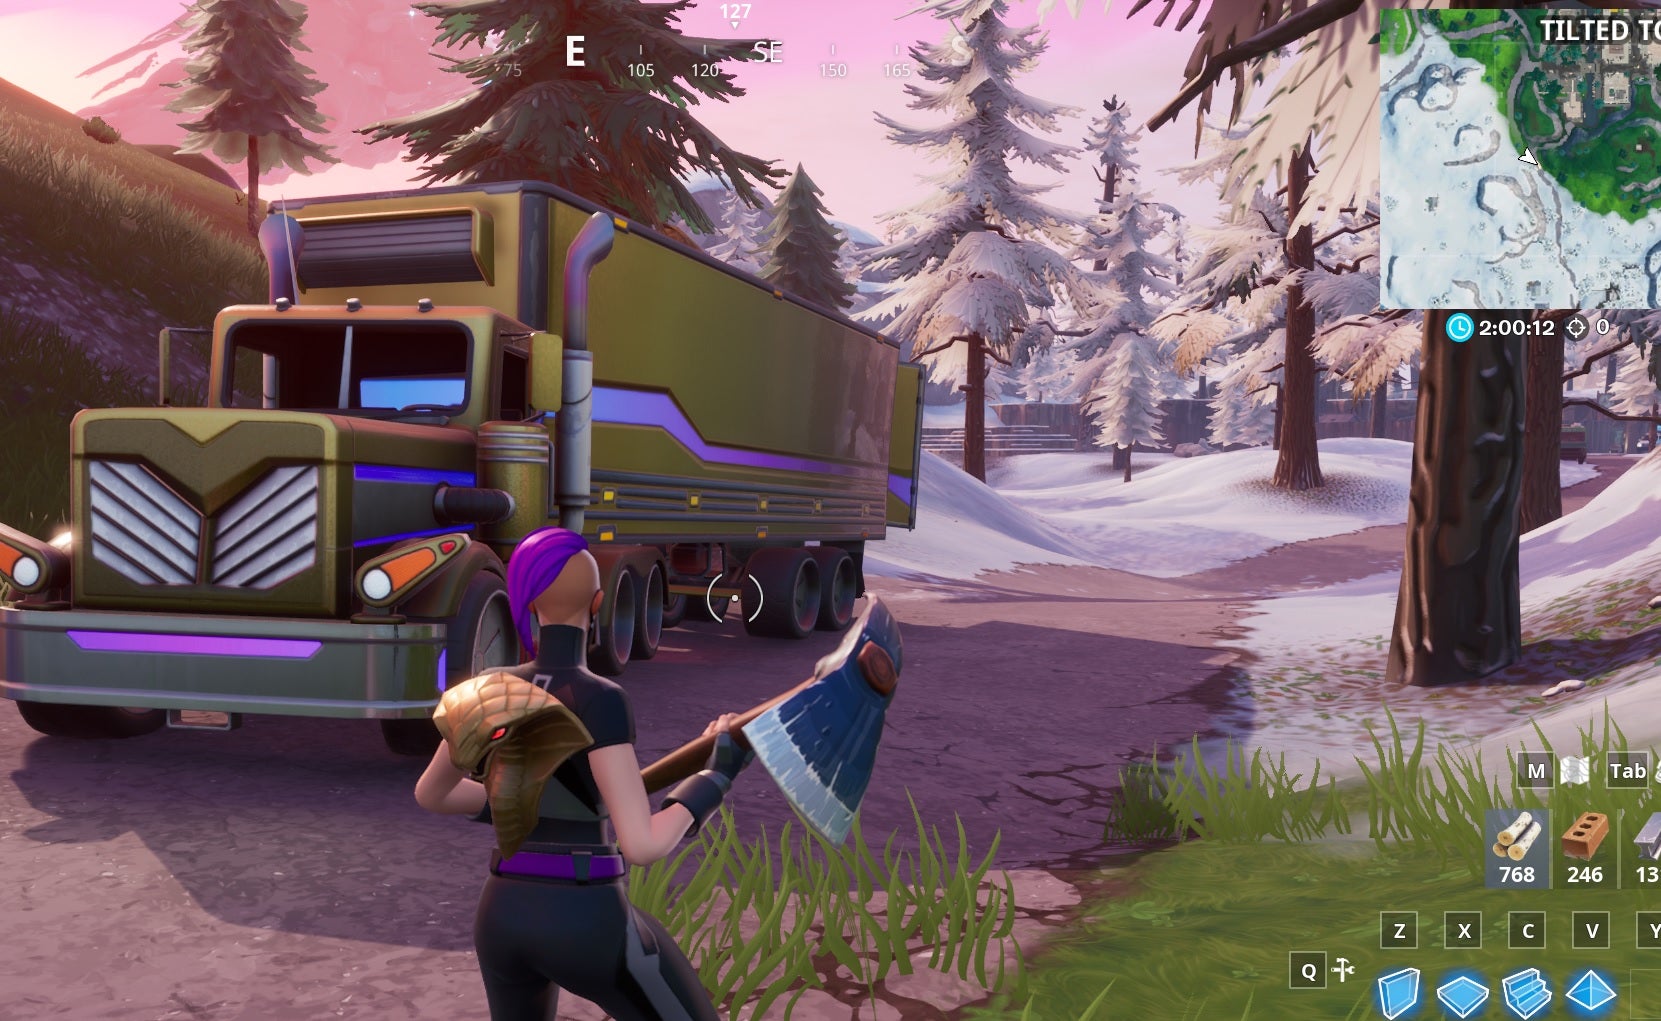 Image for Fortnite Season 10: search between a basement film camera, a snowy stone head and a gold big rig